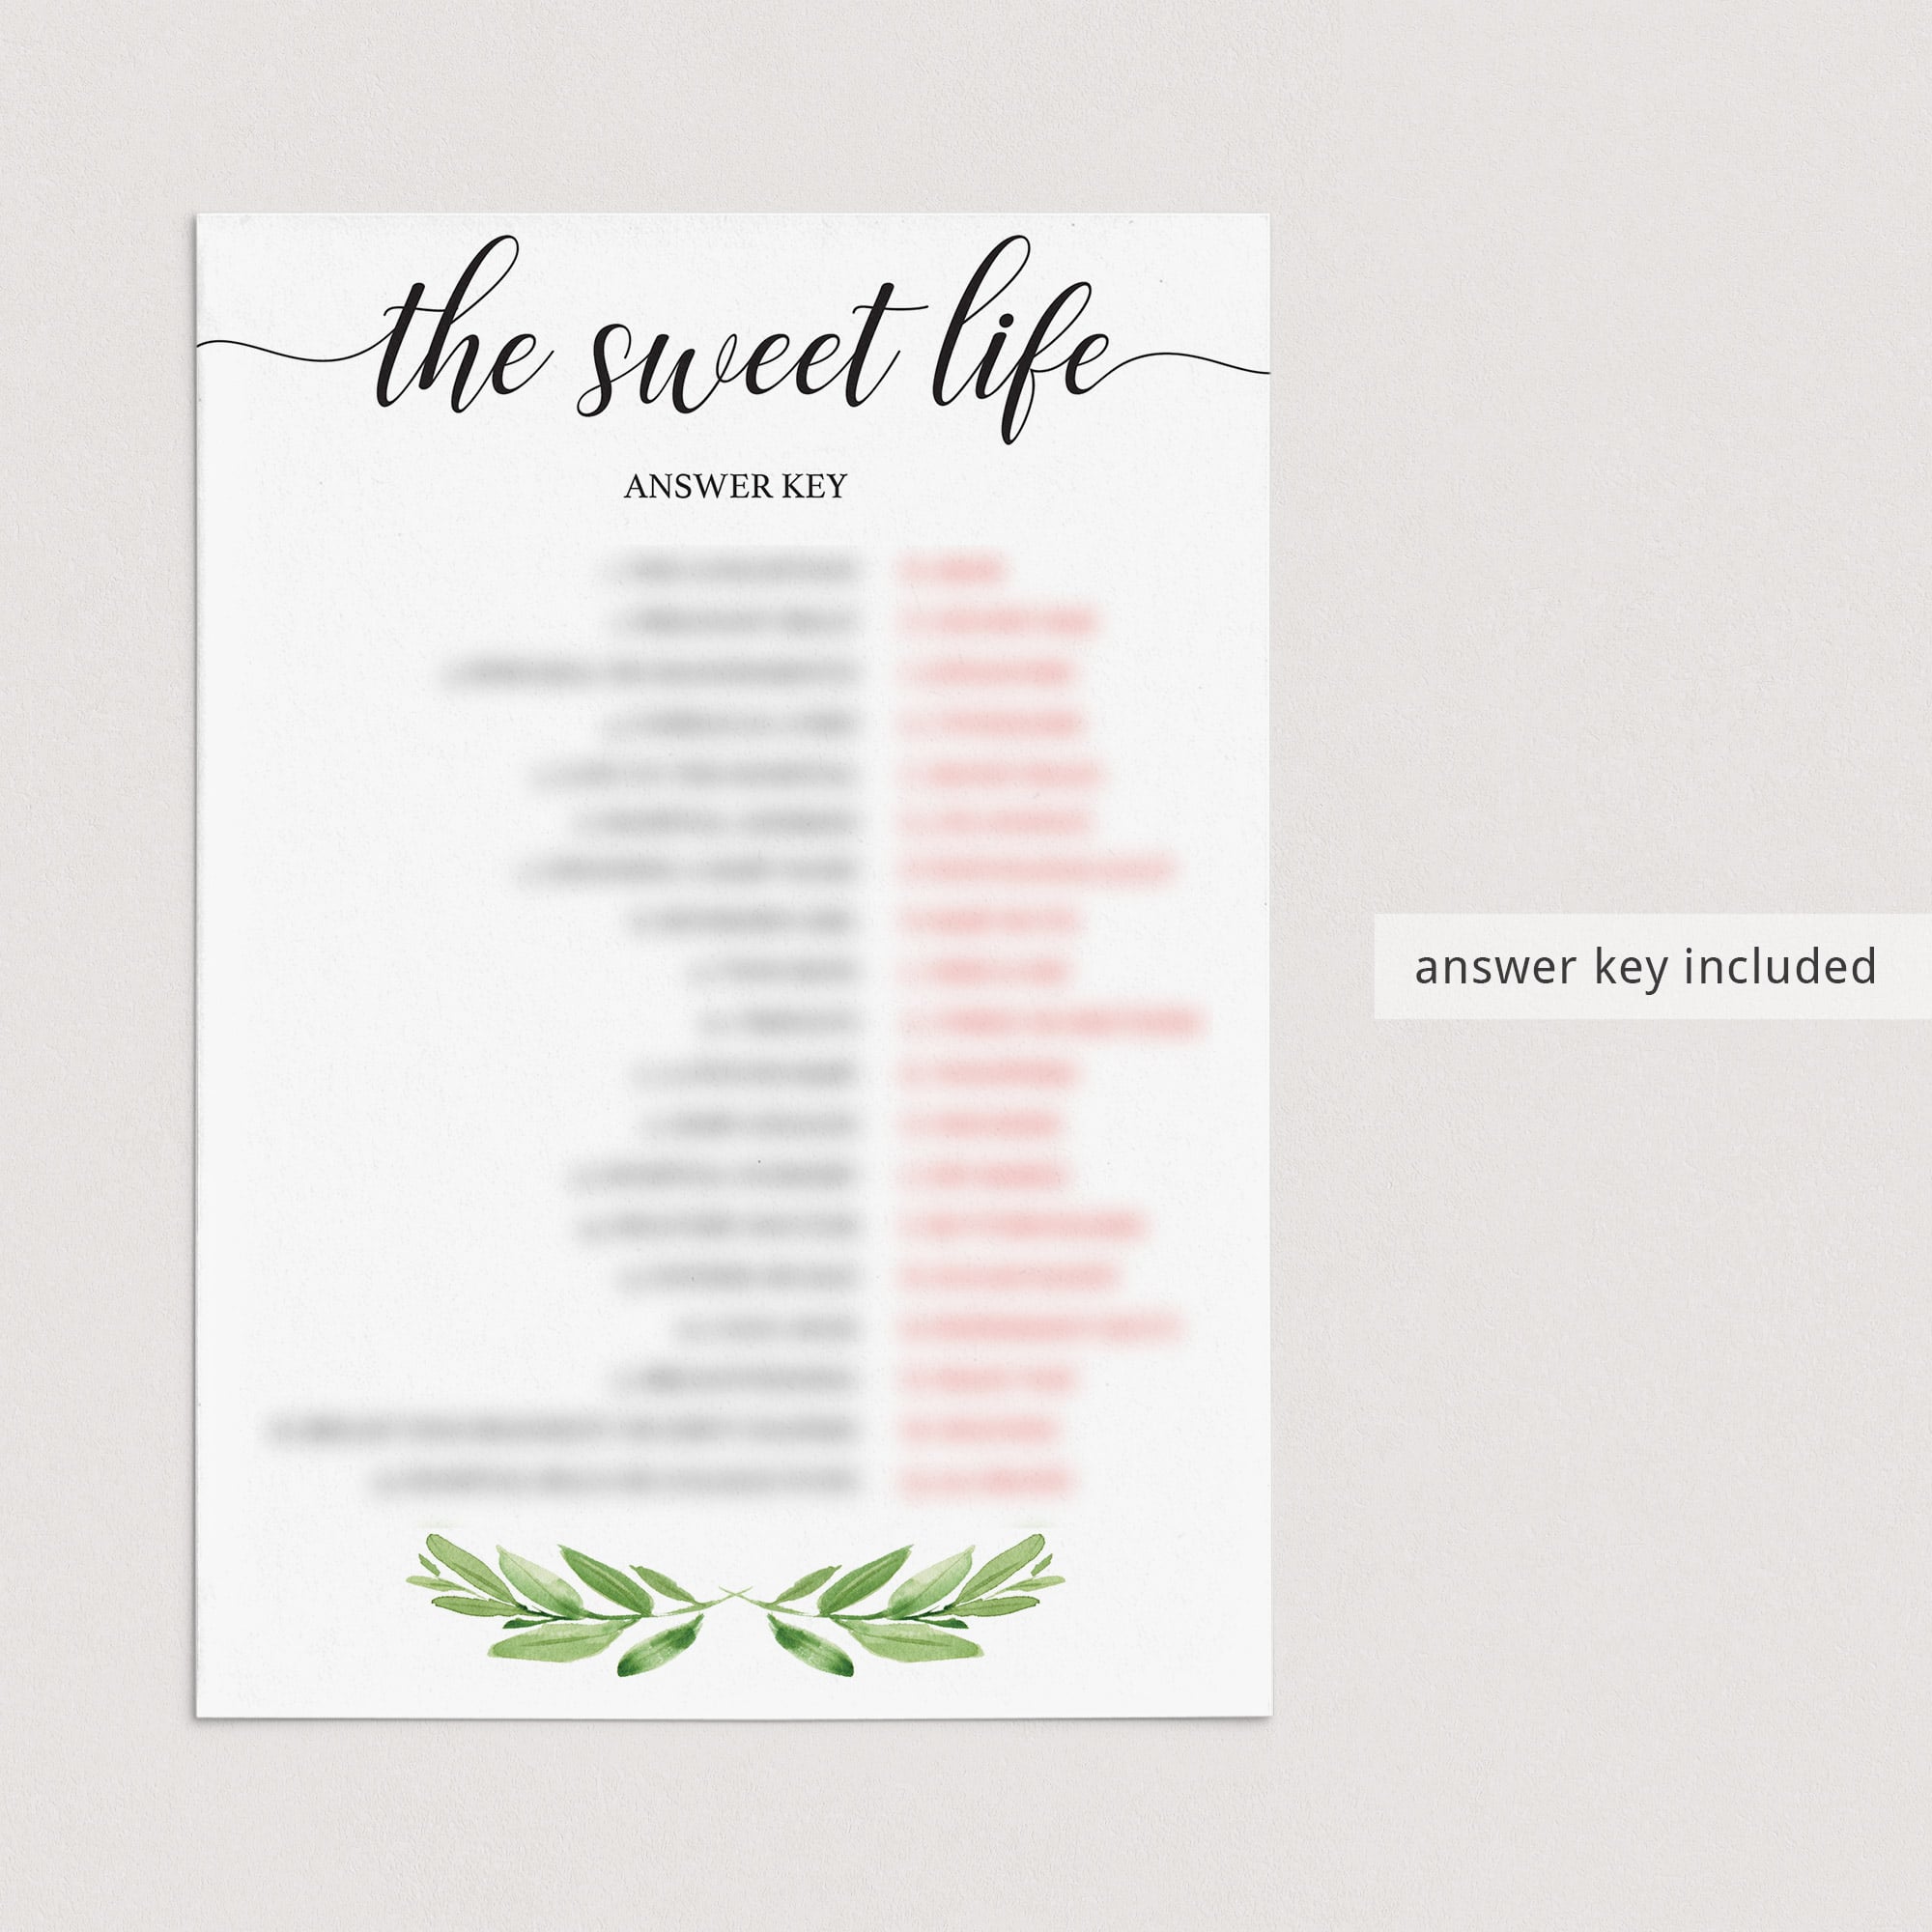 The sweet life game answer key printable by LittleSizzle